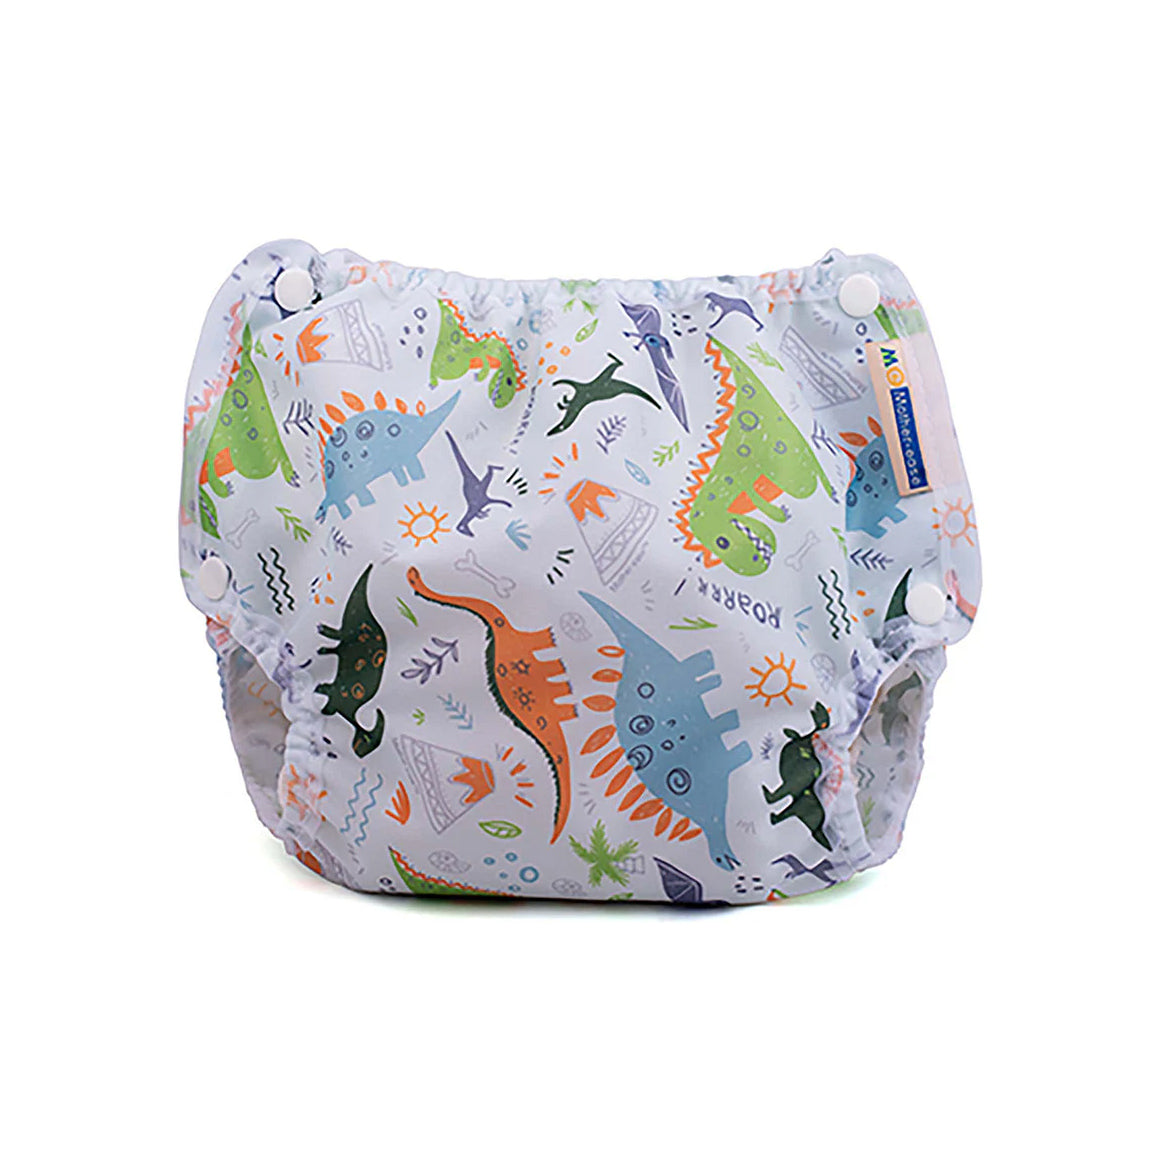 Mother-ease Air Flow Cover Dinosaurs